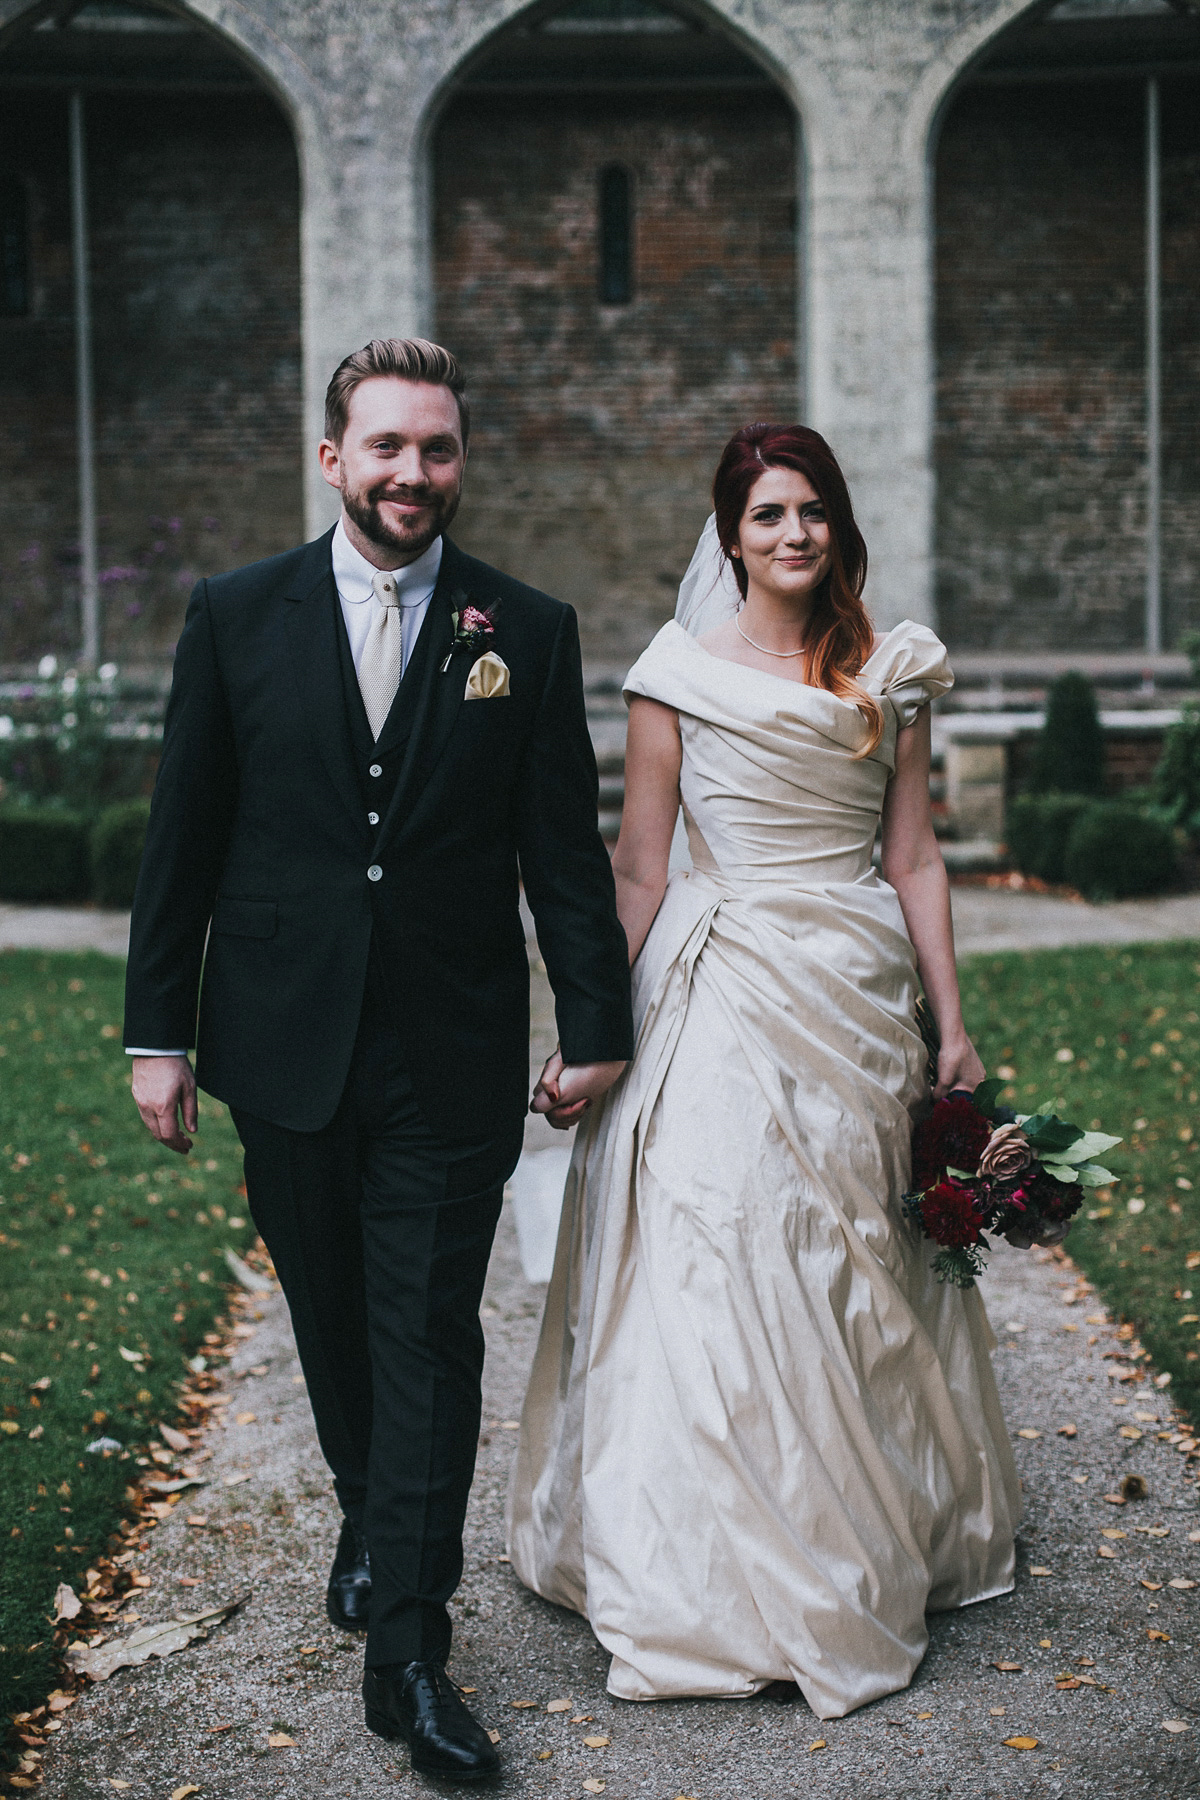 Bride Natasha wore a gown inspired by the dress worn by Dita von Teese for her wedding to Marilyn Manson. Natasha and Ian's wedding was full of Autumnal, gothic romance. Photography by Matt Horan.